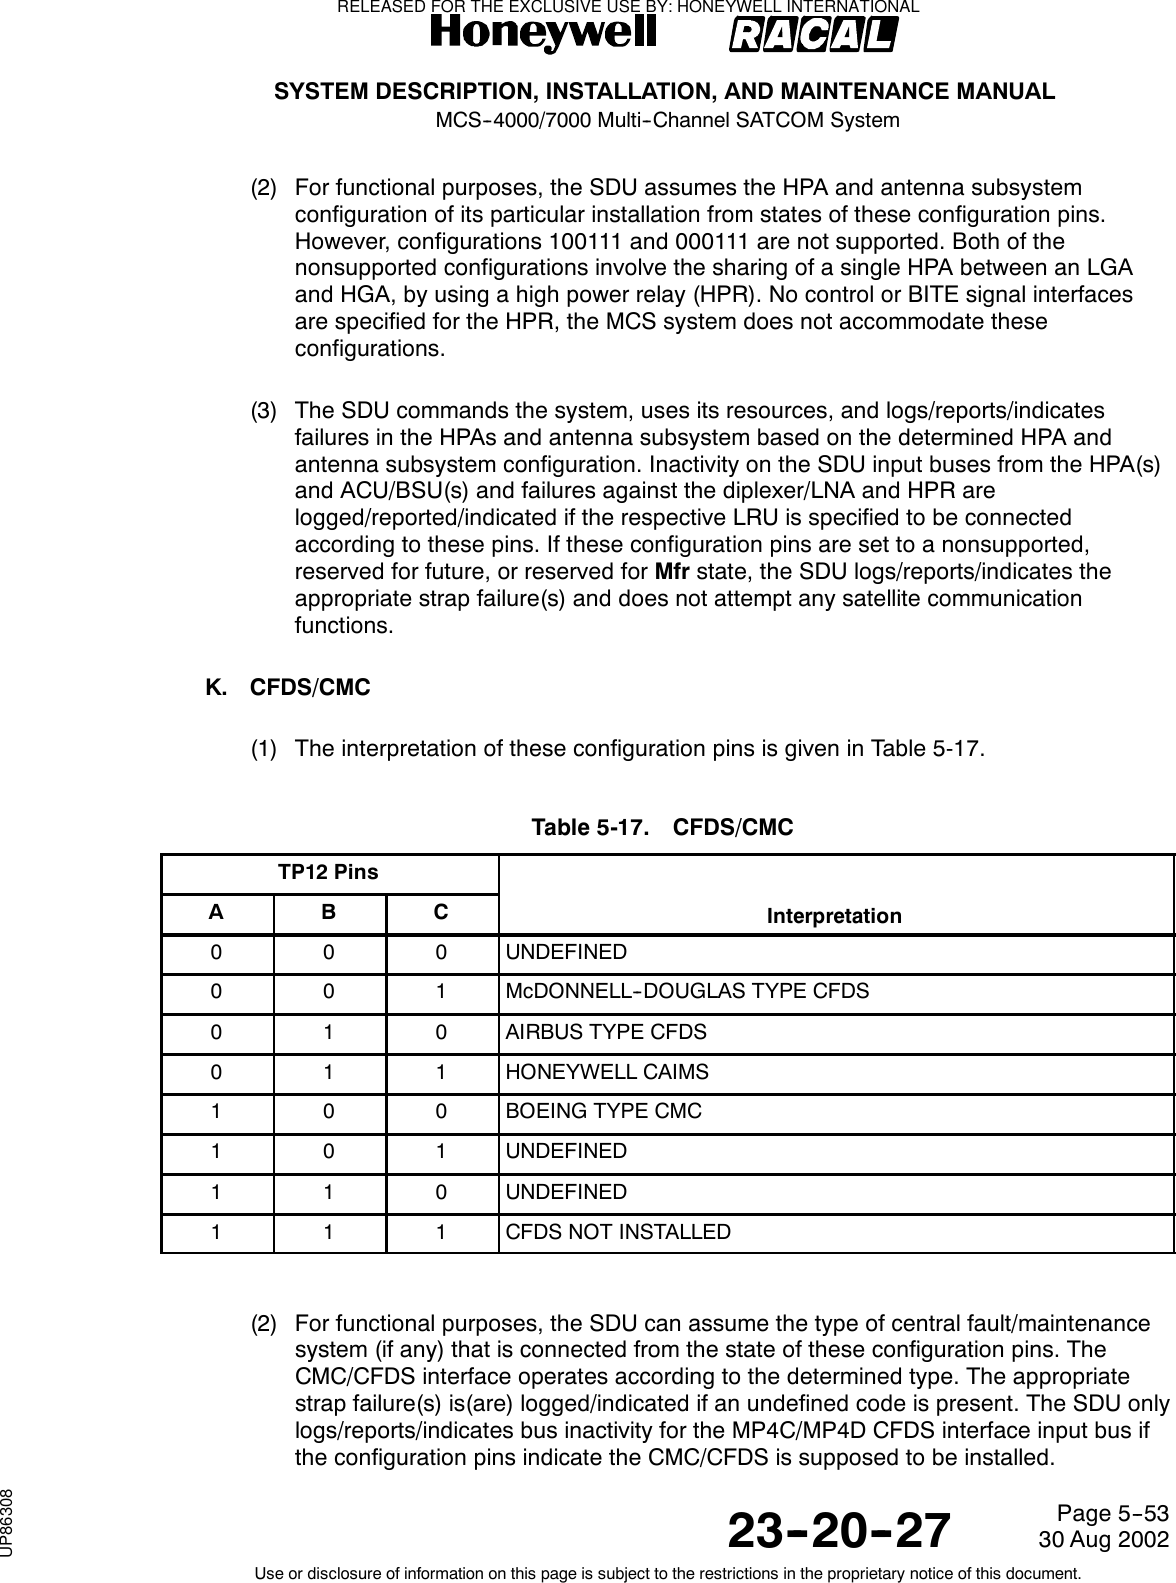 SYSTEM DESCRIPTION, INSTALLATION, AND MAINTENANCE MANUALMCS--4000/7000 Multi--Channel SATCOM System23--20--2730 Aug 2002Use or disclosure of information on this page is subject to the restrictions in the proprietary notice of this document.Page 5--53(2) For functional purposes, the SDU assumes the HPA and antenna subsystemconfiguration of its particular installation from states of these configuration pins.However, configurations 100111 and 000111 are not supported. Both of thenonsupported configurations involve the sharing of a single HPA between an LGAand HGA, by using a high power relay (HPR). No control or BITE signal interfacesare specified for the HPR, the MCS system does not accommodate theseconfigurations.(3) The SDU commands the system, uses its resources, and logs/reports/indicatesfailures in the HPAs and antenna subsystem based on the determined HPA andantenna subsystem configuration. Inactivity on the SDU input buses from the HPA(s)and ACU/BSU(s) and failures against the diplexer/LNA and HPR arelogged/reported/indicated if the respective LRU is specified to be connectedaccording to these pins. If these configuration pins are set to a nonsupported,reserved for future, or reserved for Mfr state, the SDU logs/reports/indicates theappropriate strap failure(s) and does not attempt any satellite communicationfunctions.K. CFDS/CMC(1) The interpretation of these configuration pins is given in Table 5-17.Table 5-17. CFDS/CMCTP12 PinsABC Interpretation000UNDEFINED001McDONNELL--DOUGLAS TYPE CFDS010AIRBUS TYPE CFDS011HONEYWELL CAIMS100BOEING TYPE CMC101UNDEFINED110UNDEFINED111CFDS NOT INSTALLED(2) For functional purposes, the SDU can assume the type of central fault/maintenancesystem (if any) that is connected from the state of these configuration pins. TheCMC/CFDS interface operates according to the determined type. The appropriatestrap failure(s) is(are) logged/indicated if an undefined code is present. The SDU onlylogs/reports/indicates bus inactivity for the MP4C/MP4D CFDS interface input bus ifthe configuration pins indicate the CMC/CFDS is supposed to be installed.RELEASED FOR THE EXCLUSIVE USE BY: HONEYWELL INTERNATIONALUP86308